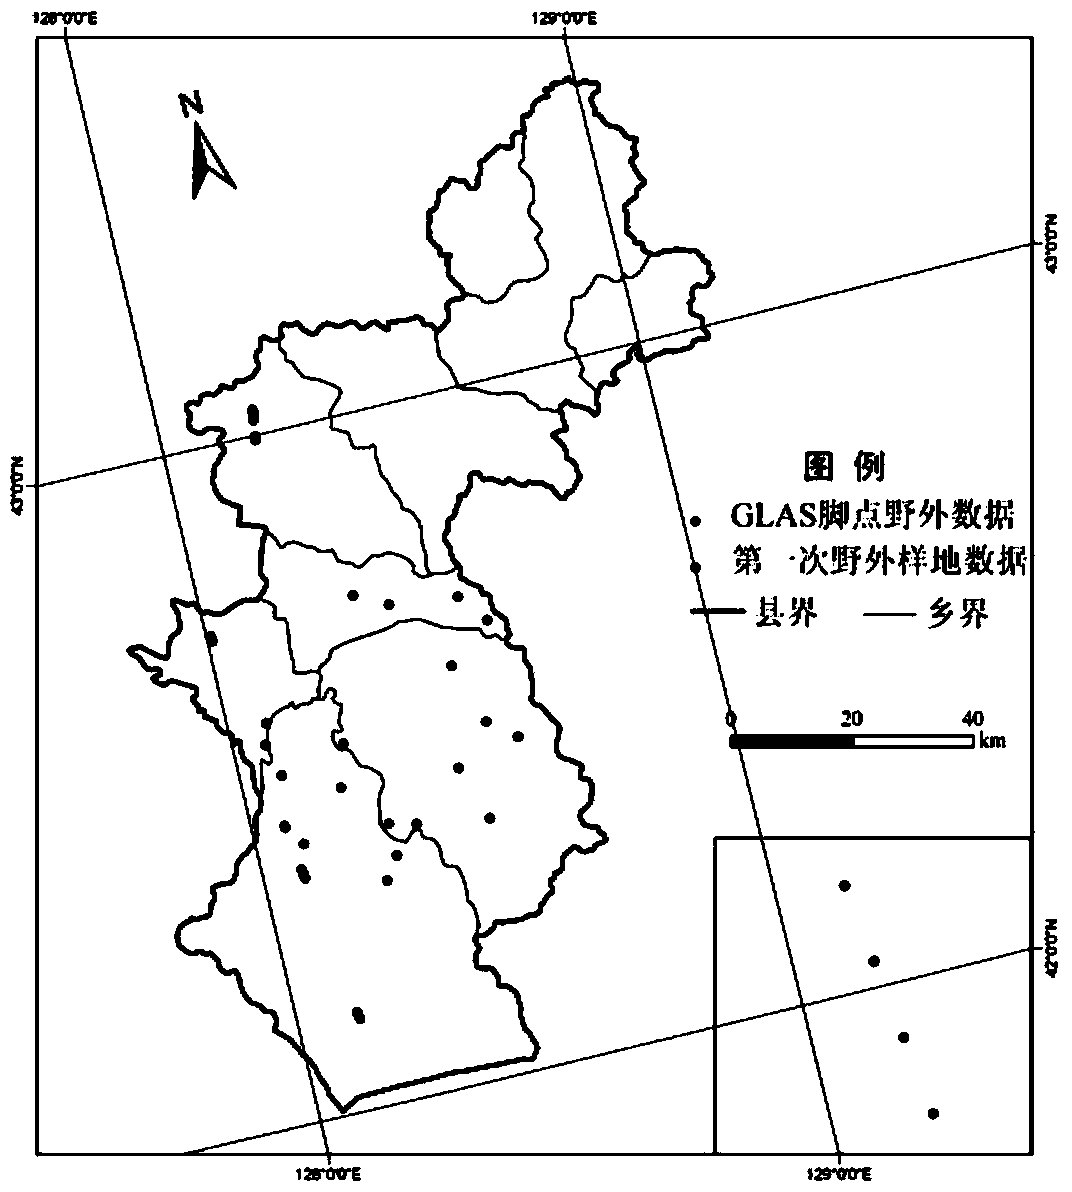 Regional scale forest canopy height remote sensing retrieval method